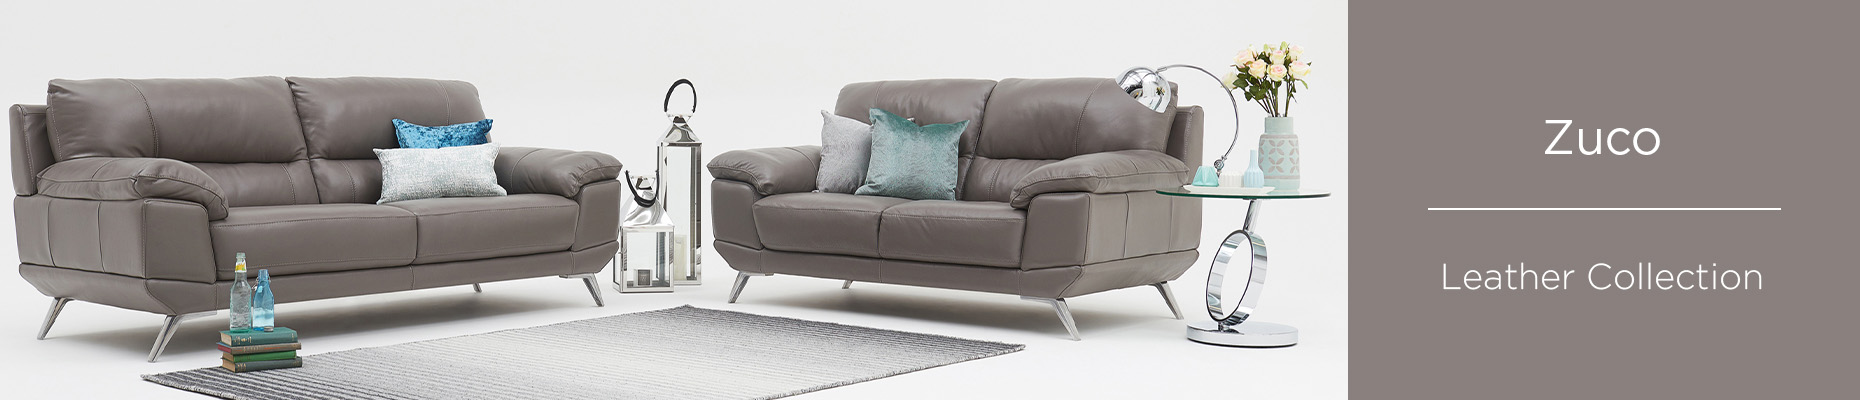 Zuco Leather sofa collection at Forrest Furnishing